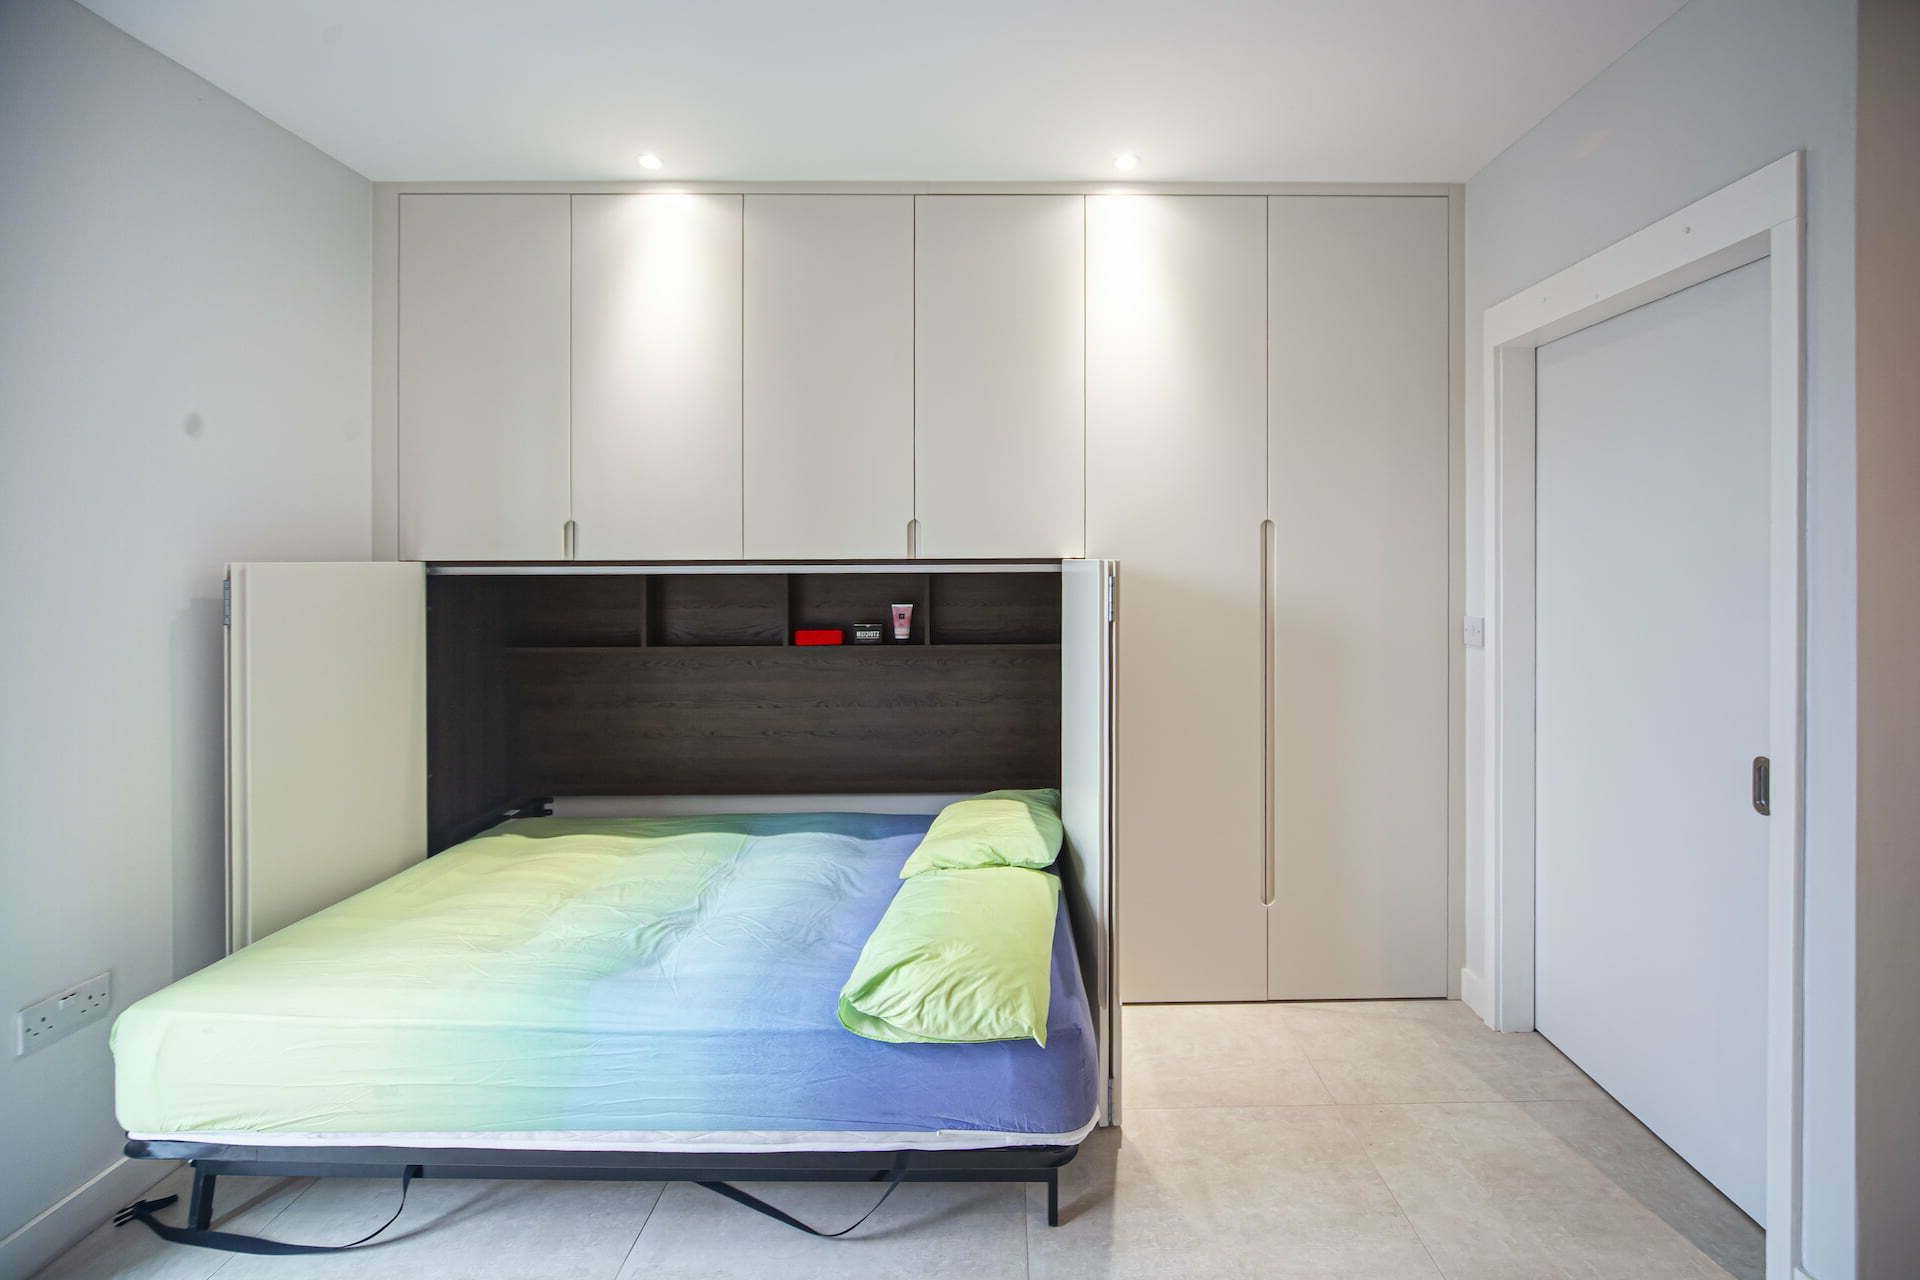 Folding Bespoke Wall Beds – Custom Made Bed Built Into Wall, Pull Down  Murphy Bed | Urban Wardrobes Throughout Wardrobes Beds (View 16 of 20)